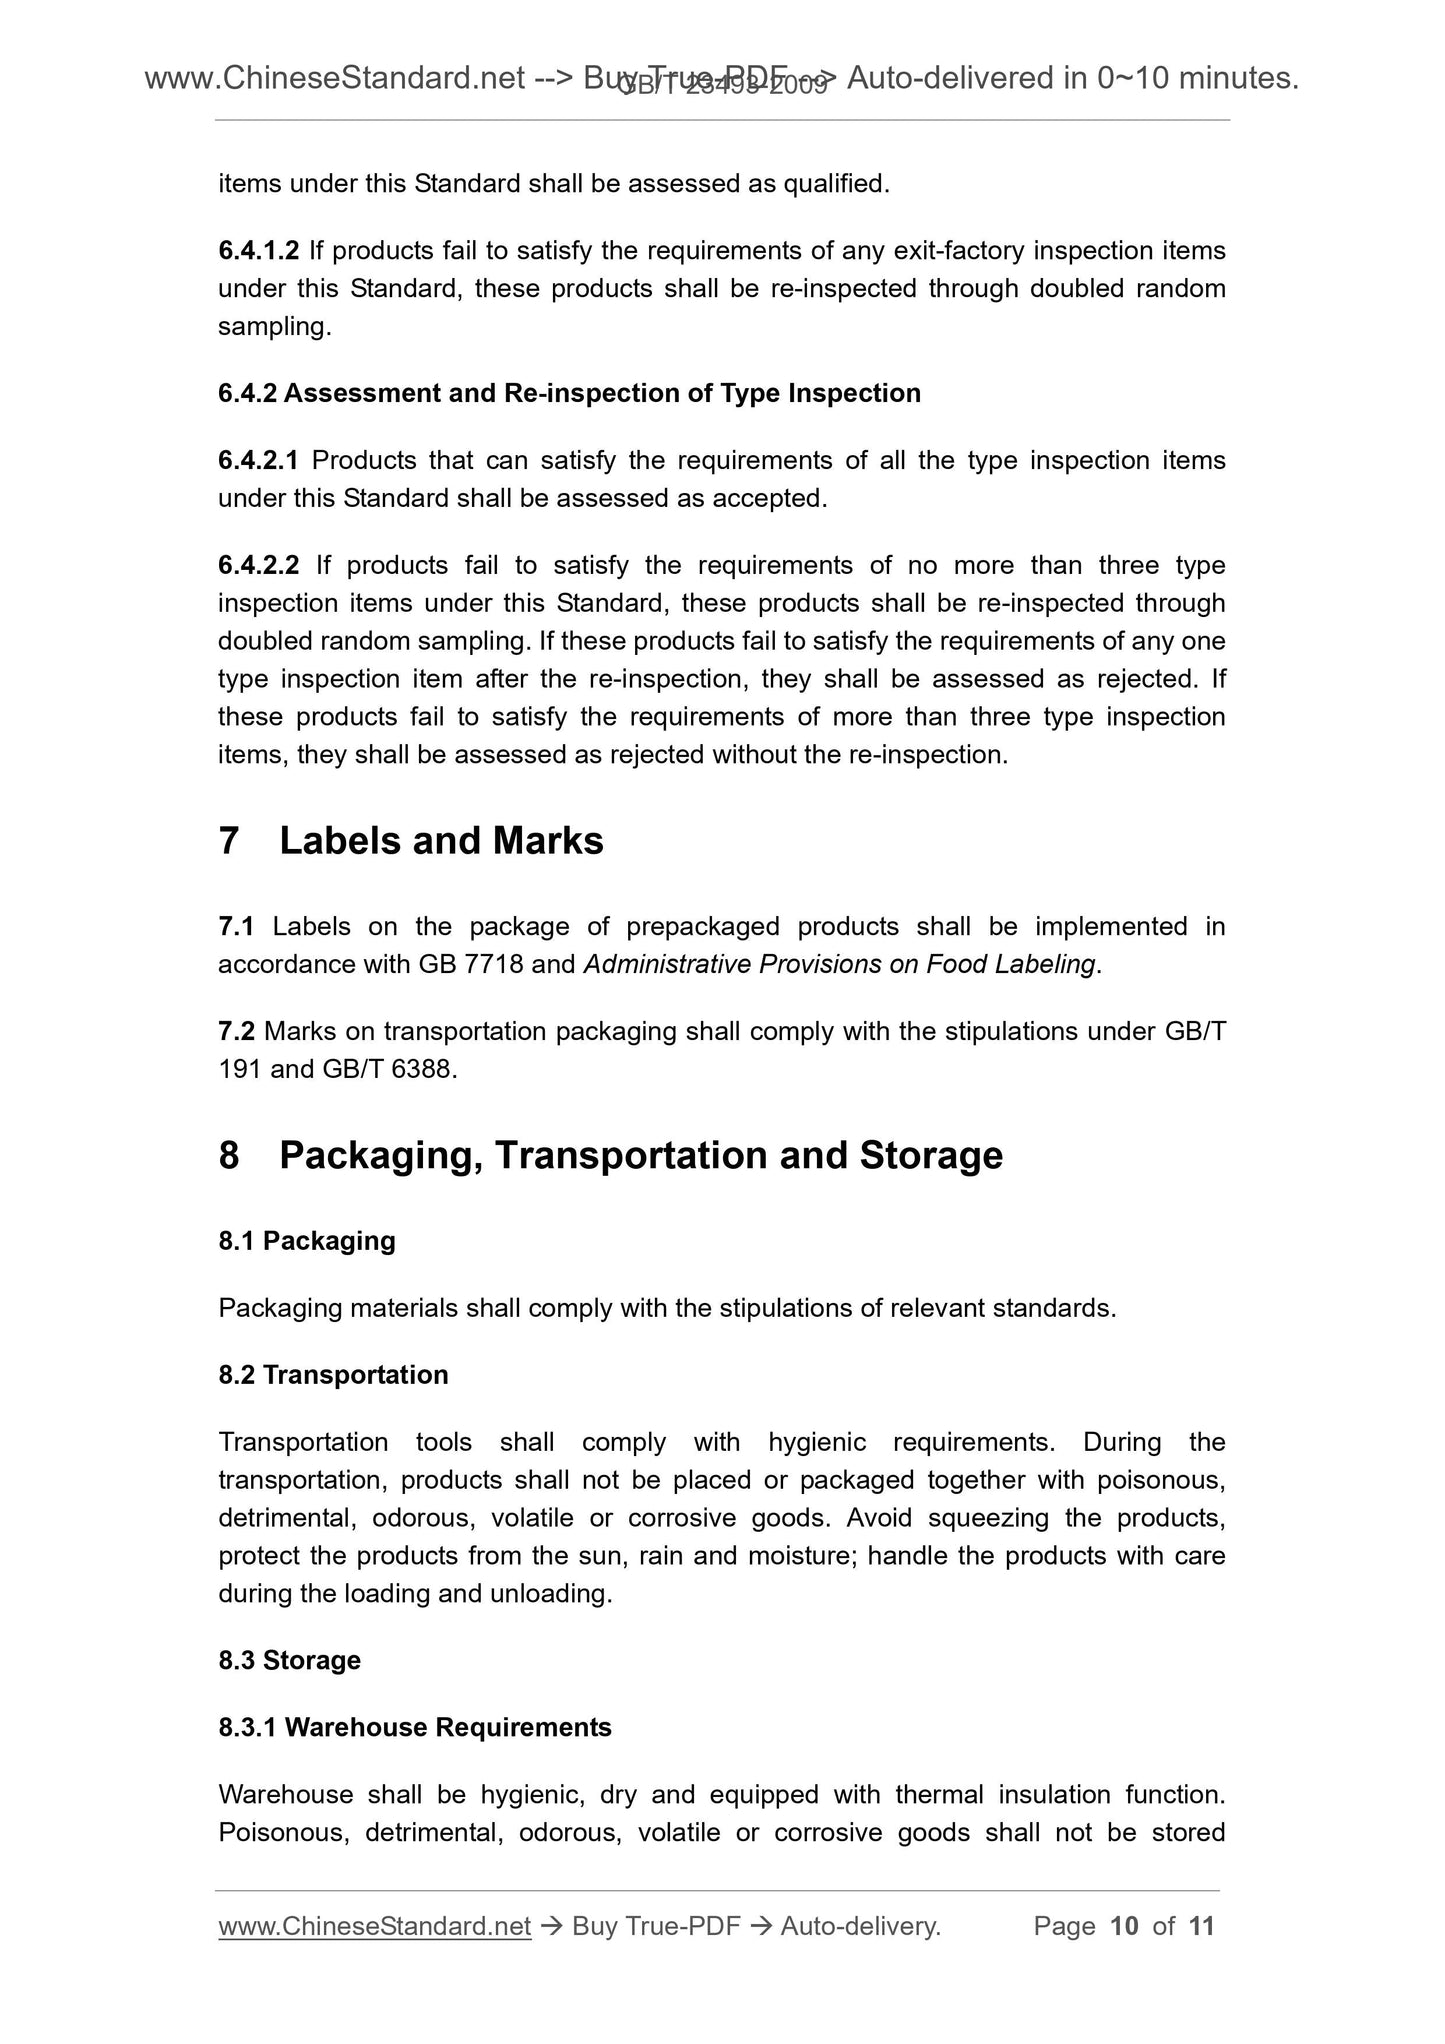 GB/T 23493-2009 Page 6